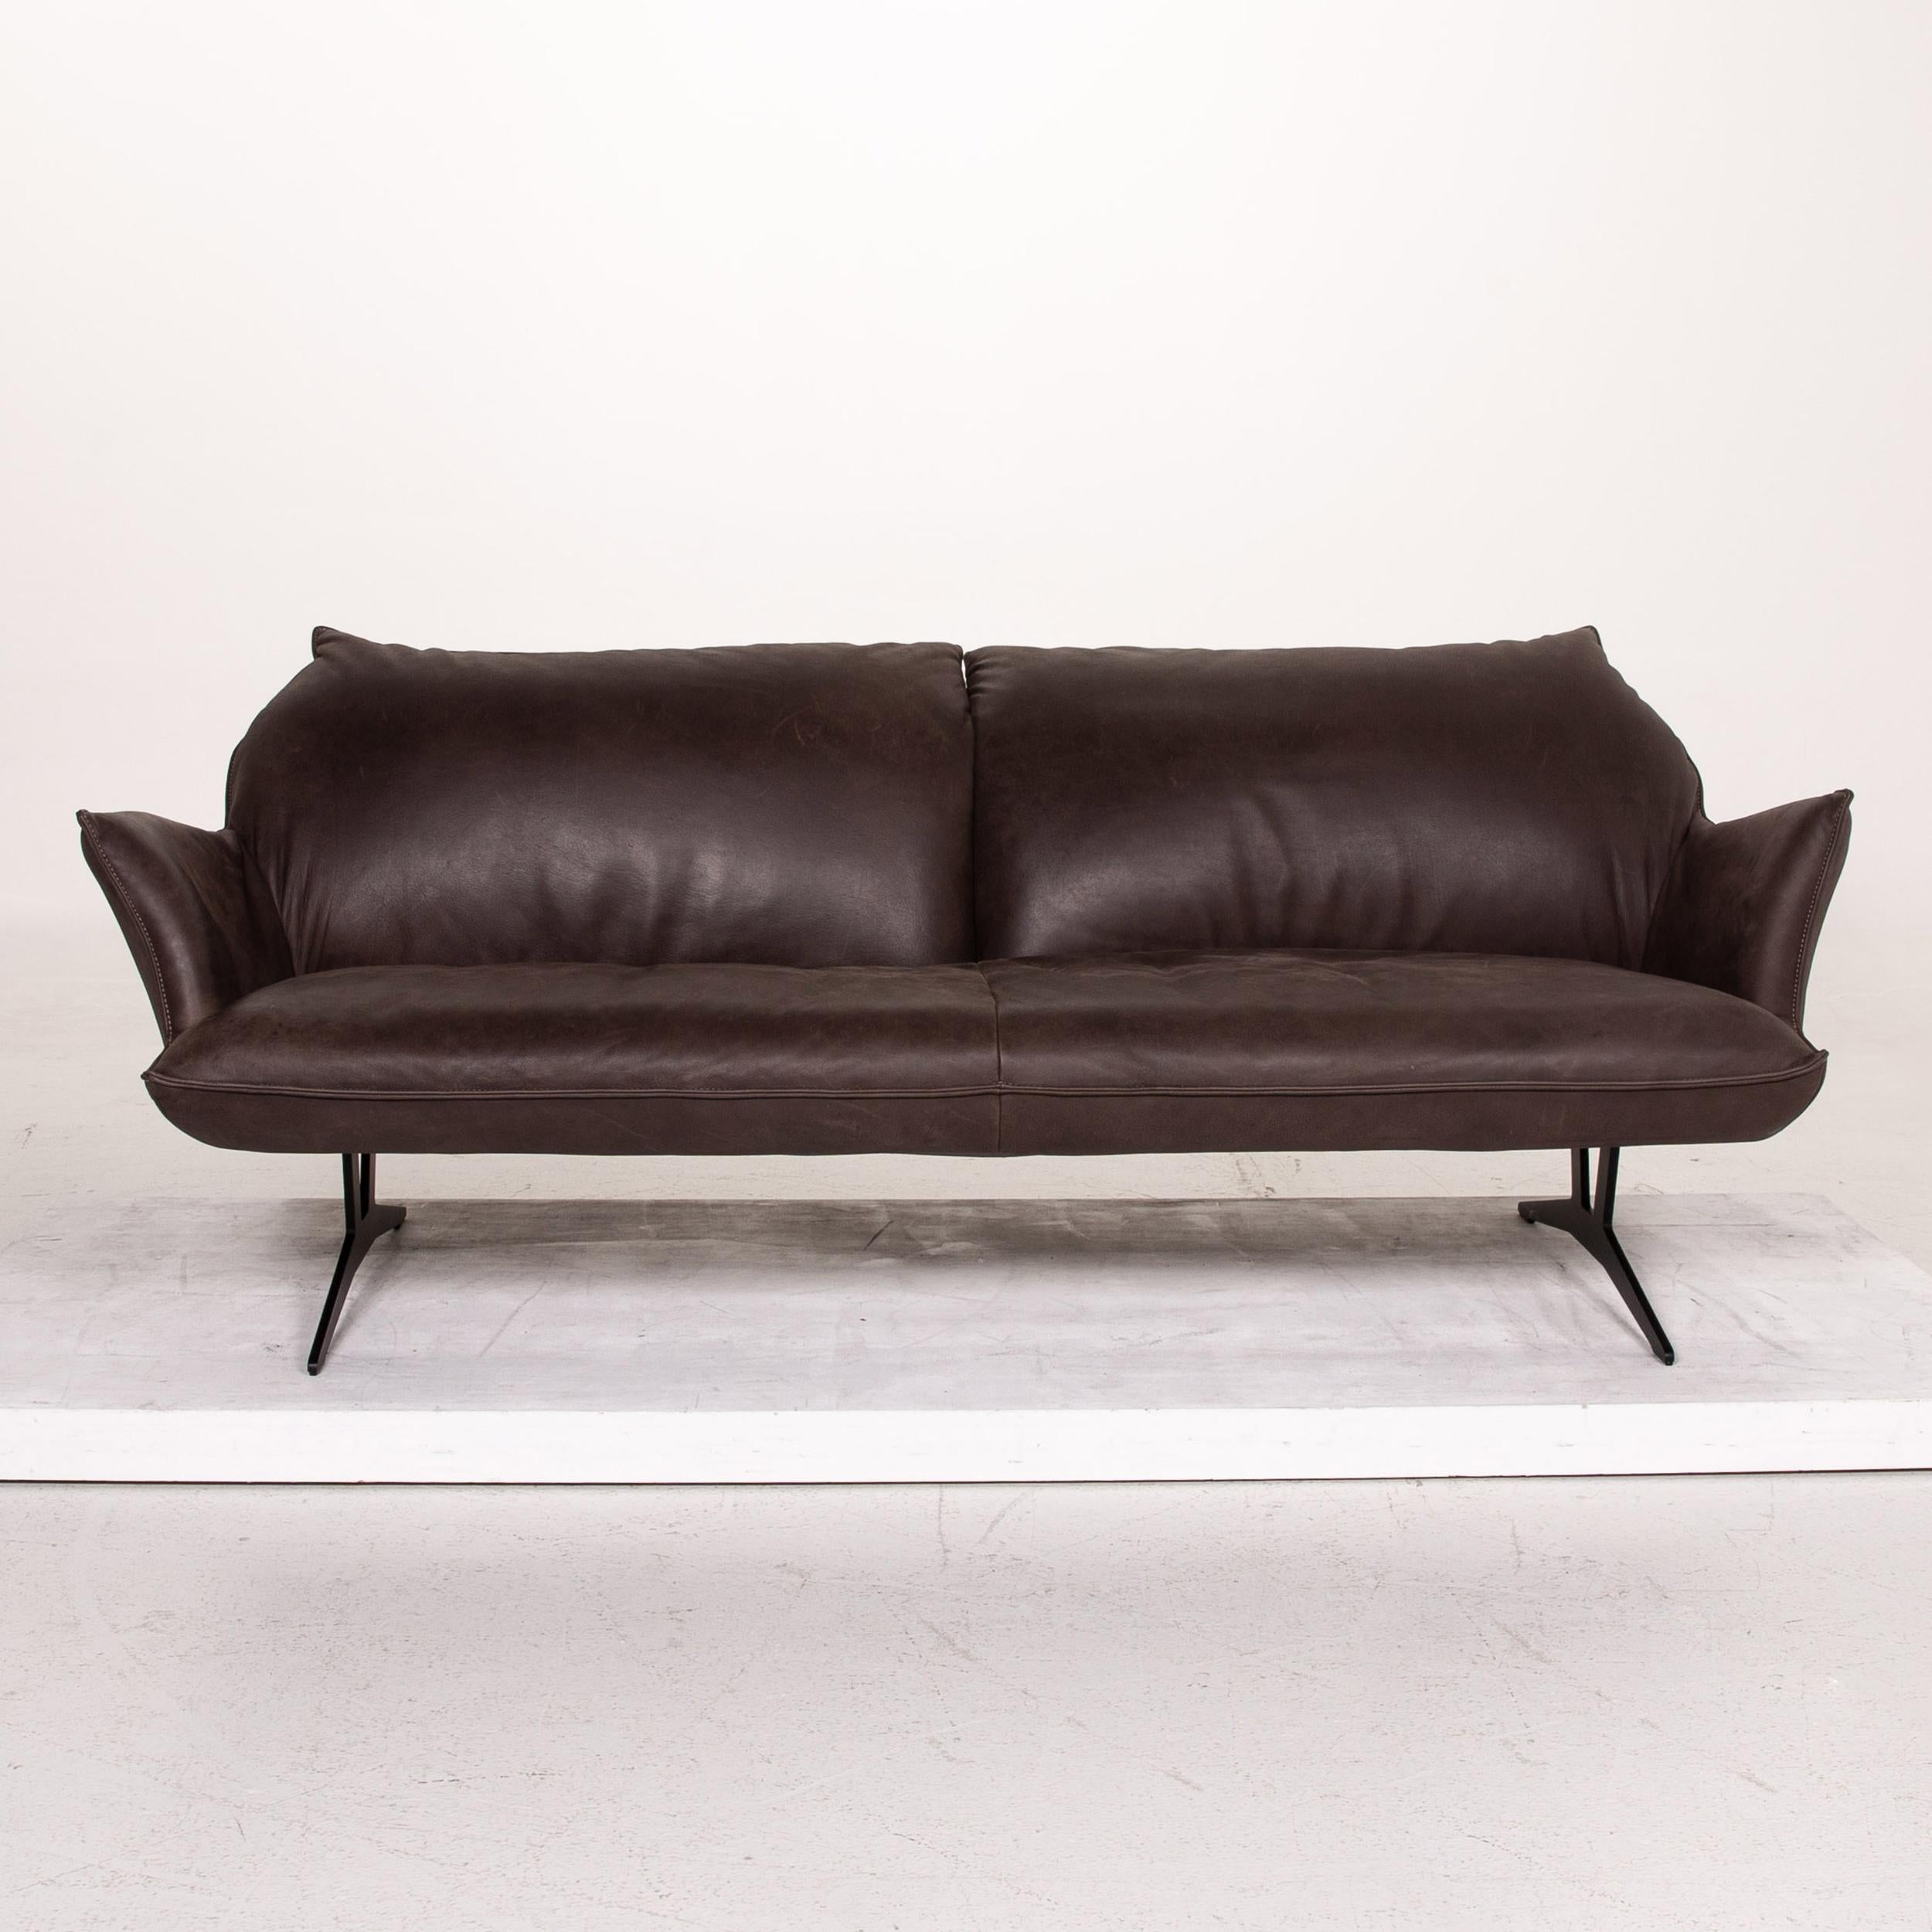 Modern Koinor Leather Sofa Brown Dark Brown Three-Seat Function Couch